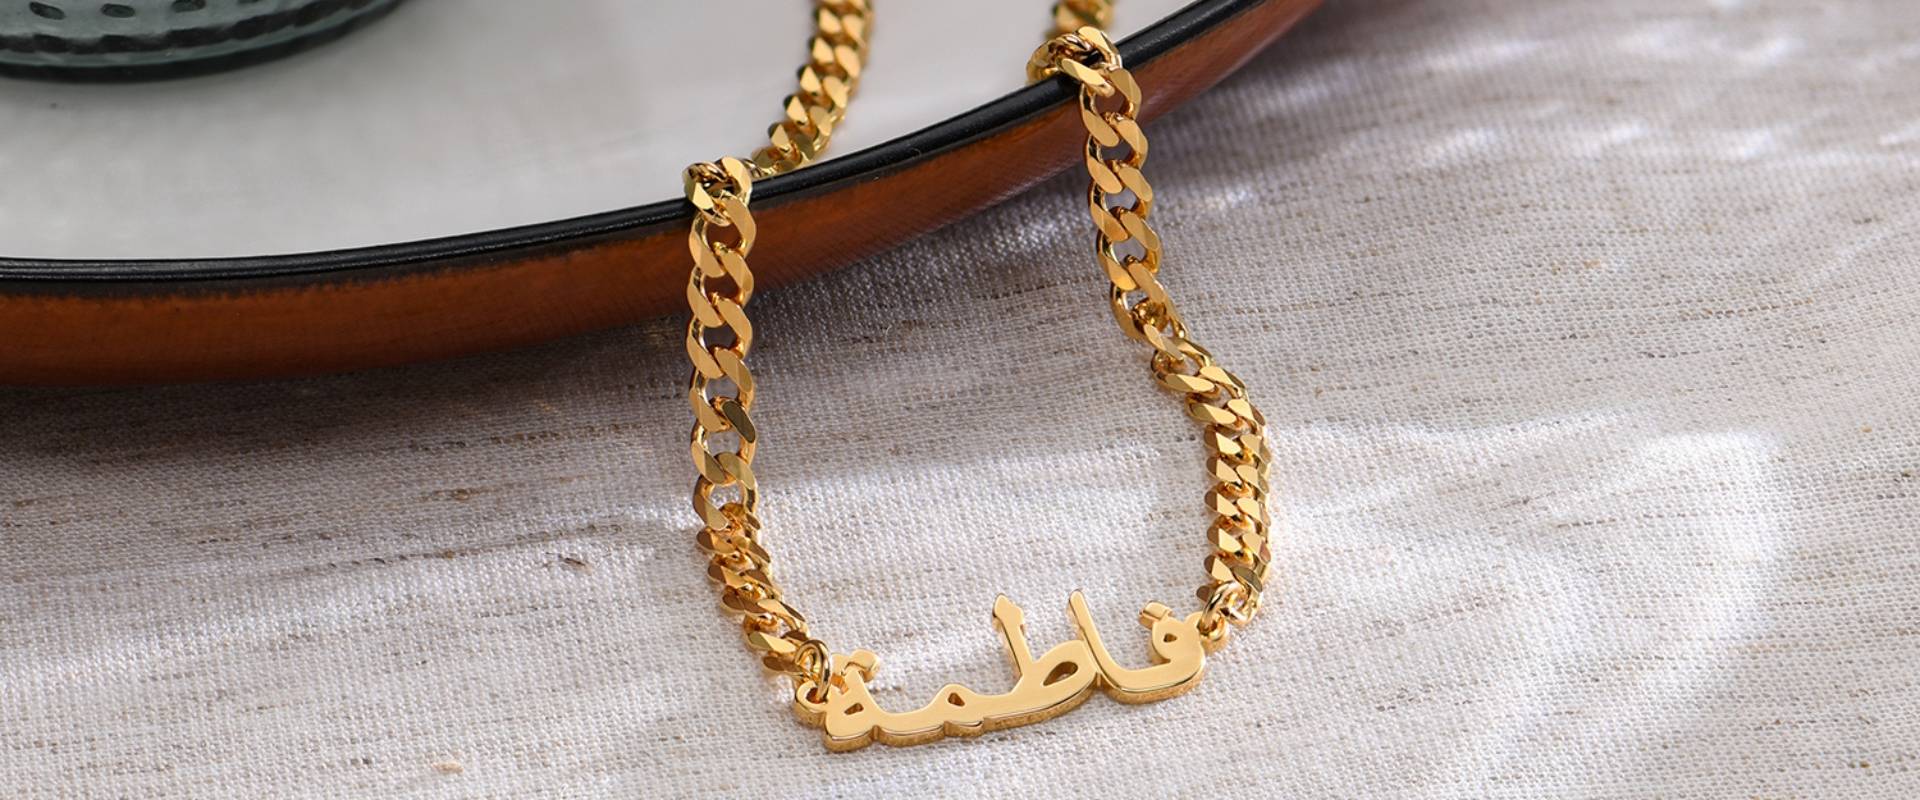 Top 3 Necklace Gifts for Arabic Mother's Day

          